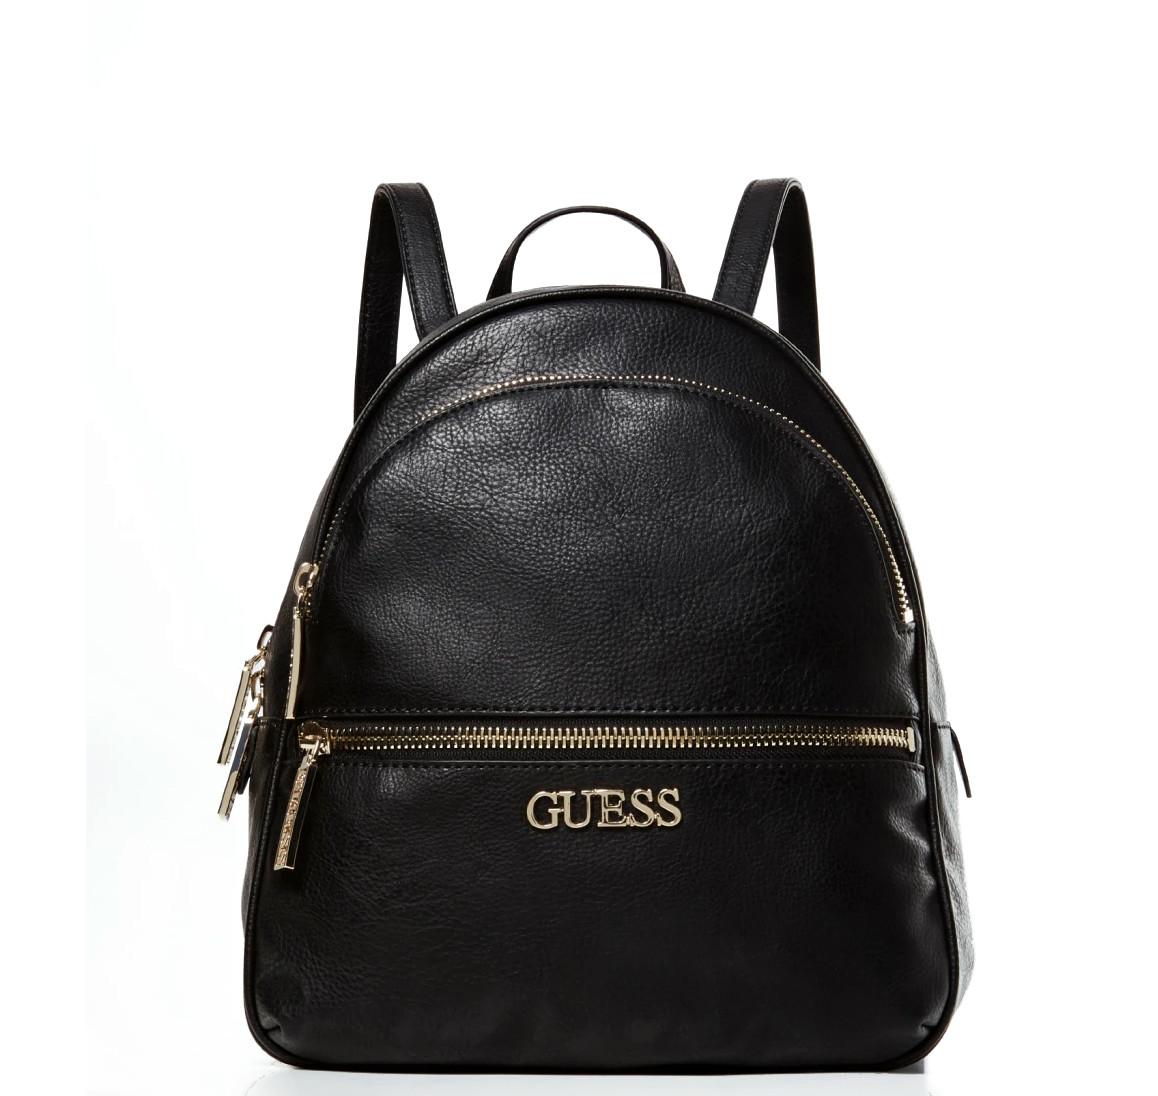 Guess Black Manhattan Backpack at FORZIERI